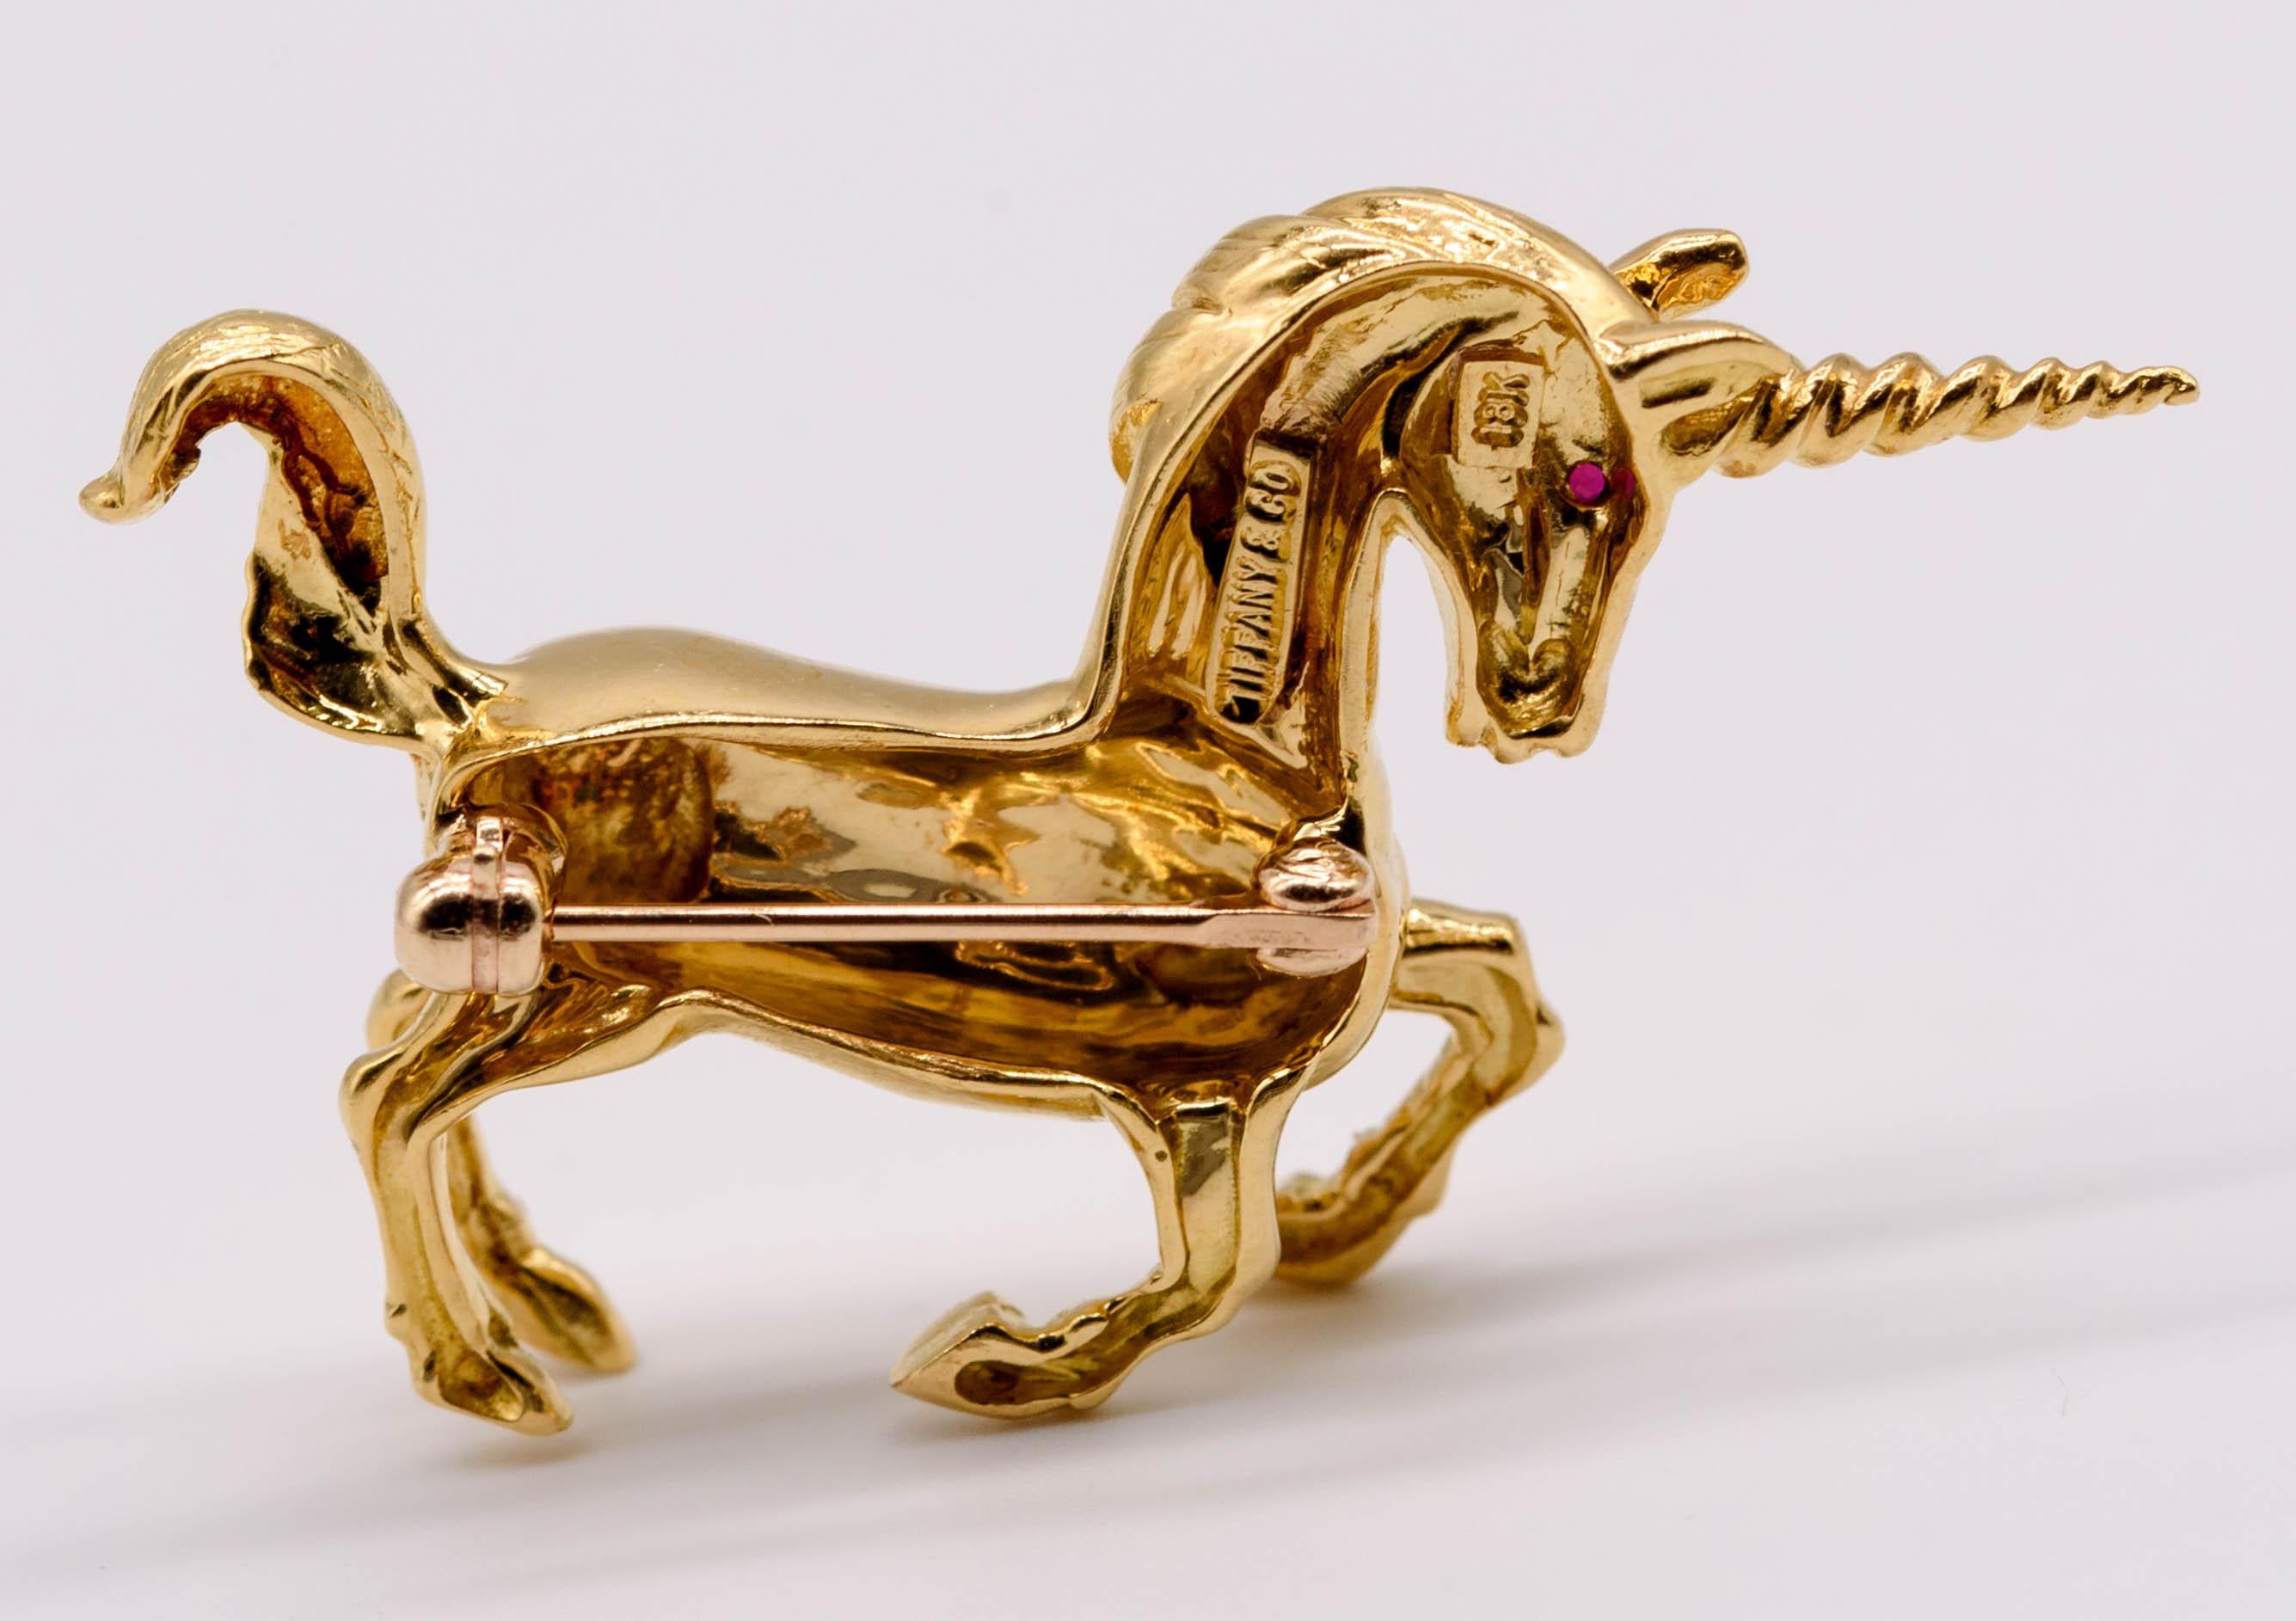 Depicting a charming little unicorn rearing his front legs and ready to begin his gallop, this Tiffany & Co pin measures 1 3/4